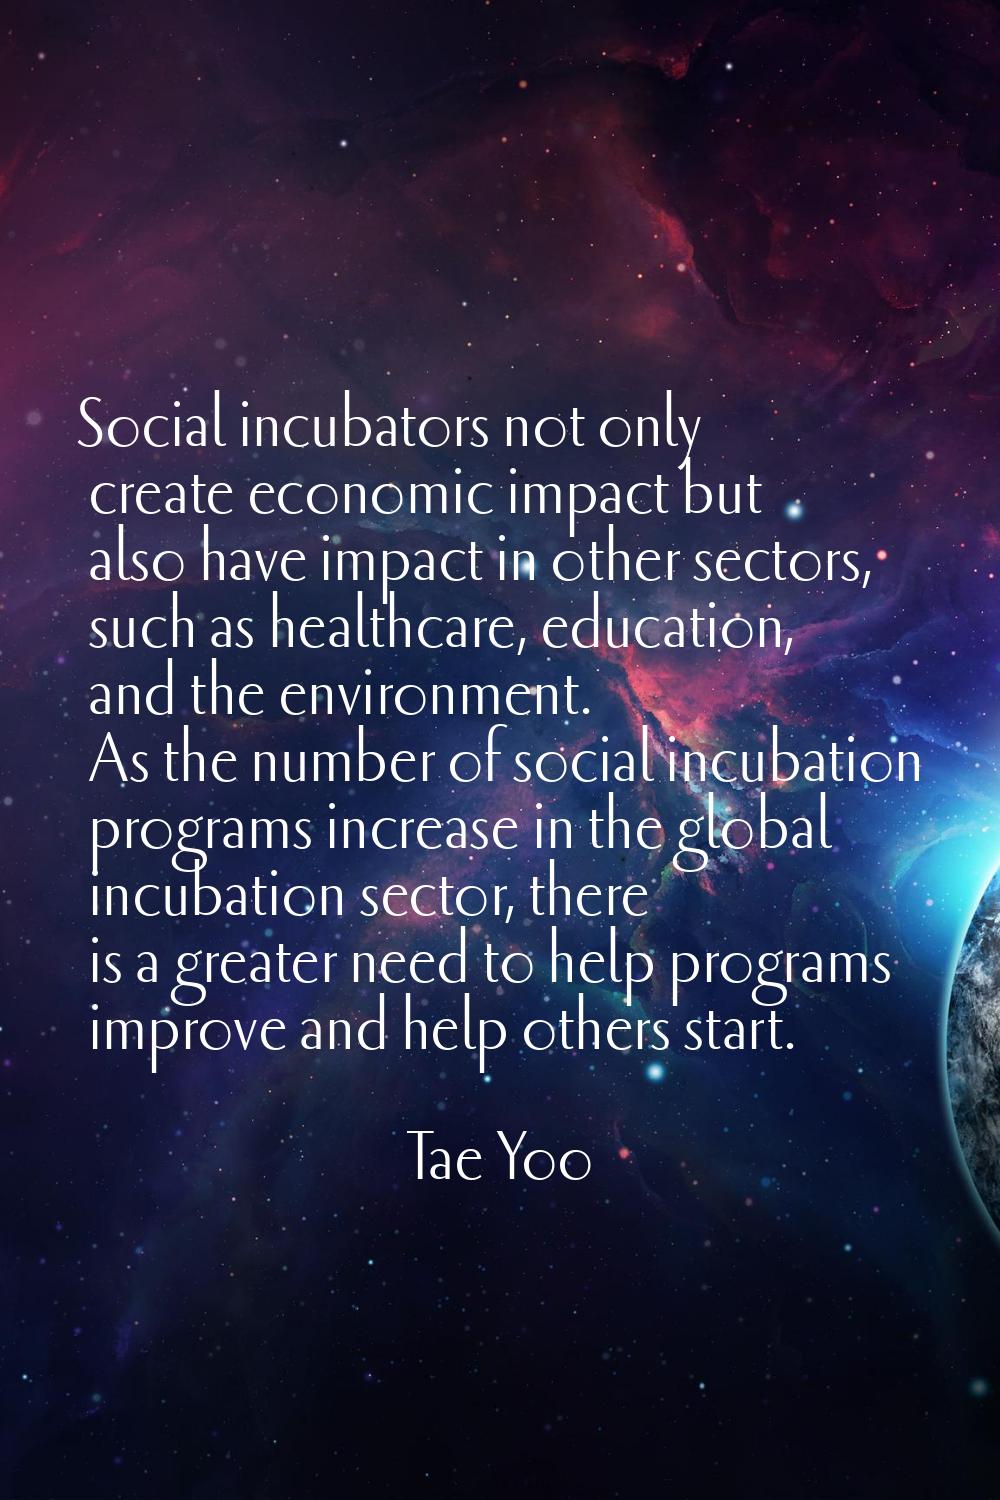 Social incubators not only create economic impact but also have impact in other sectors, such as he